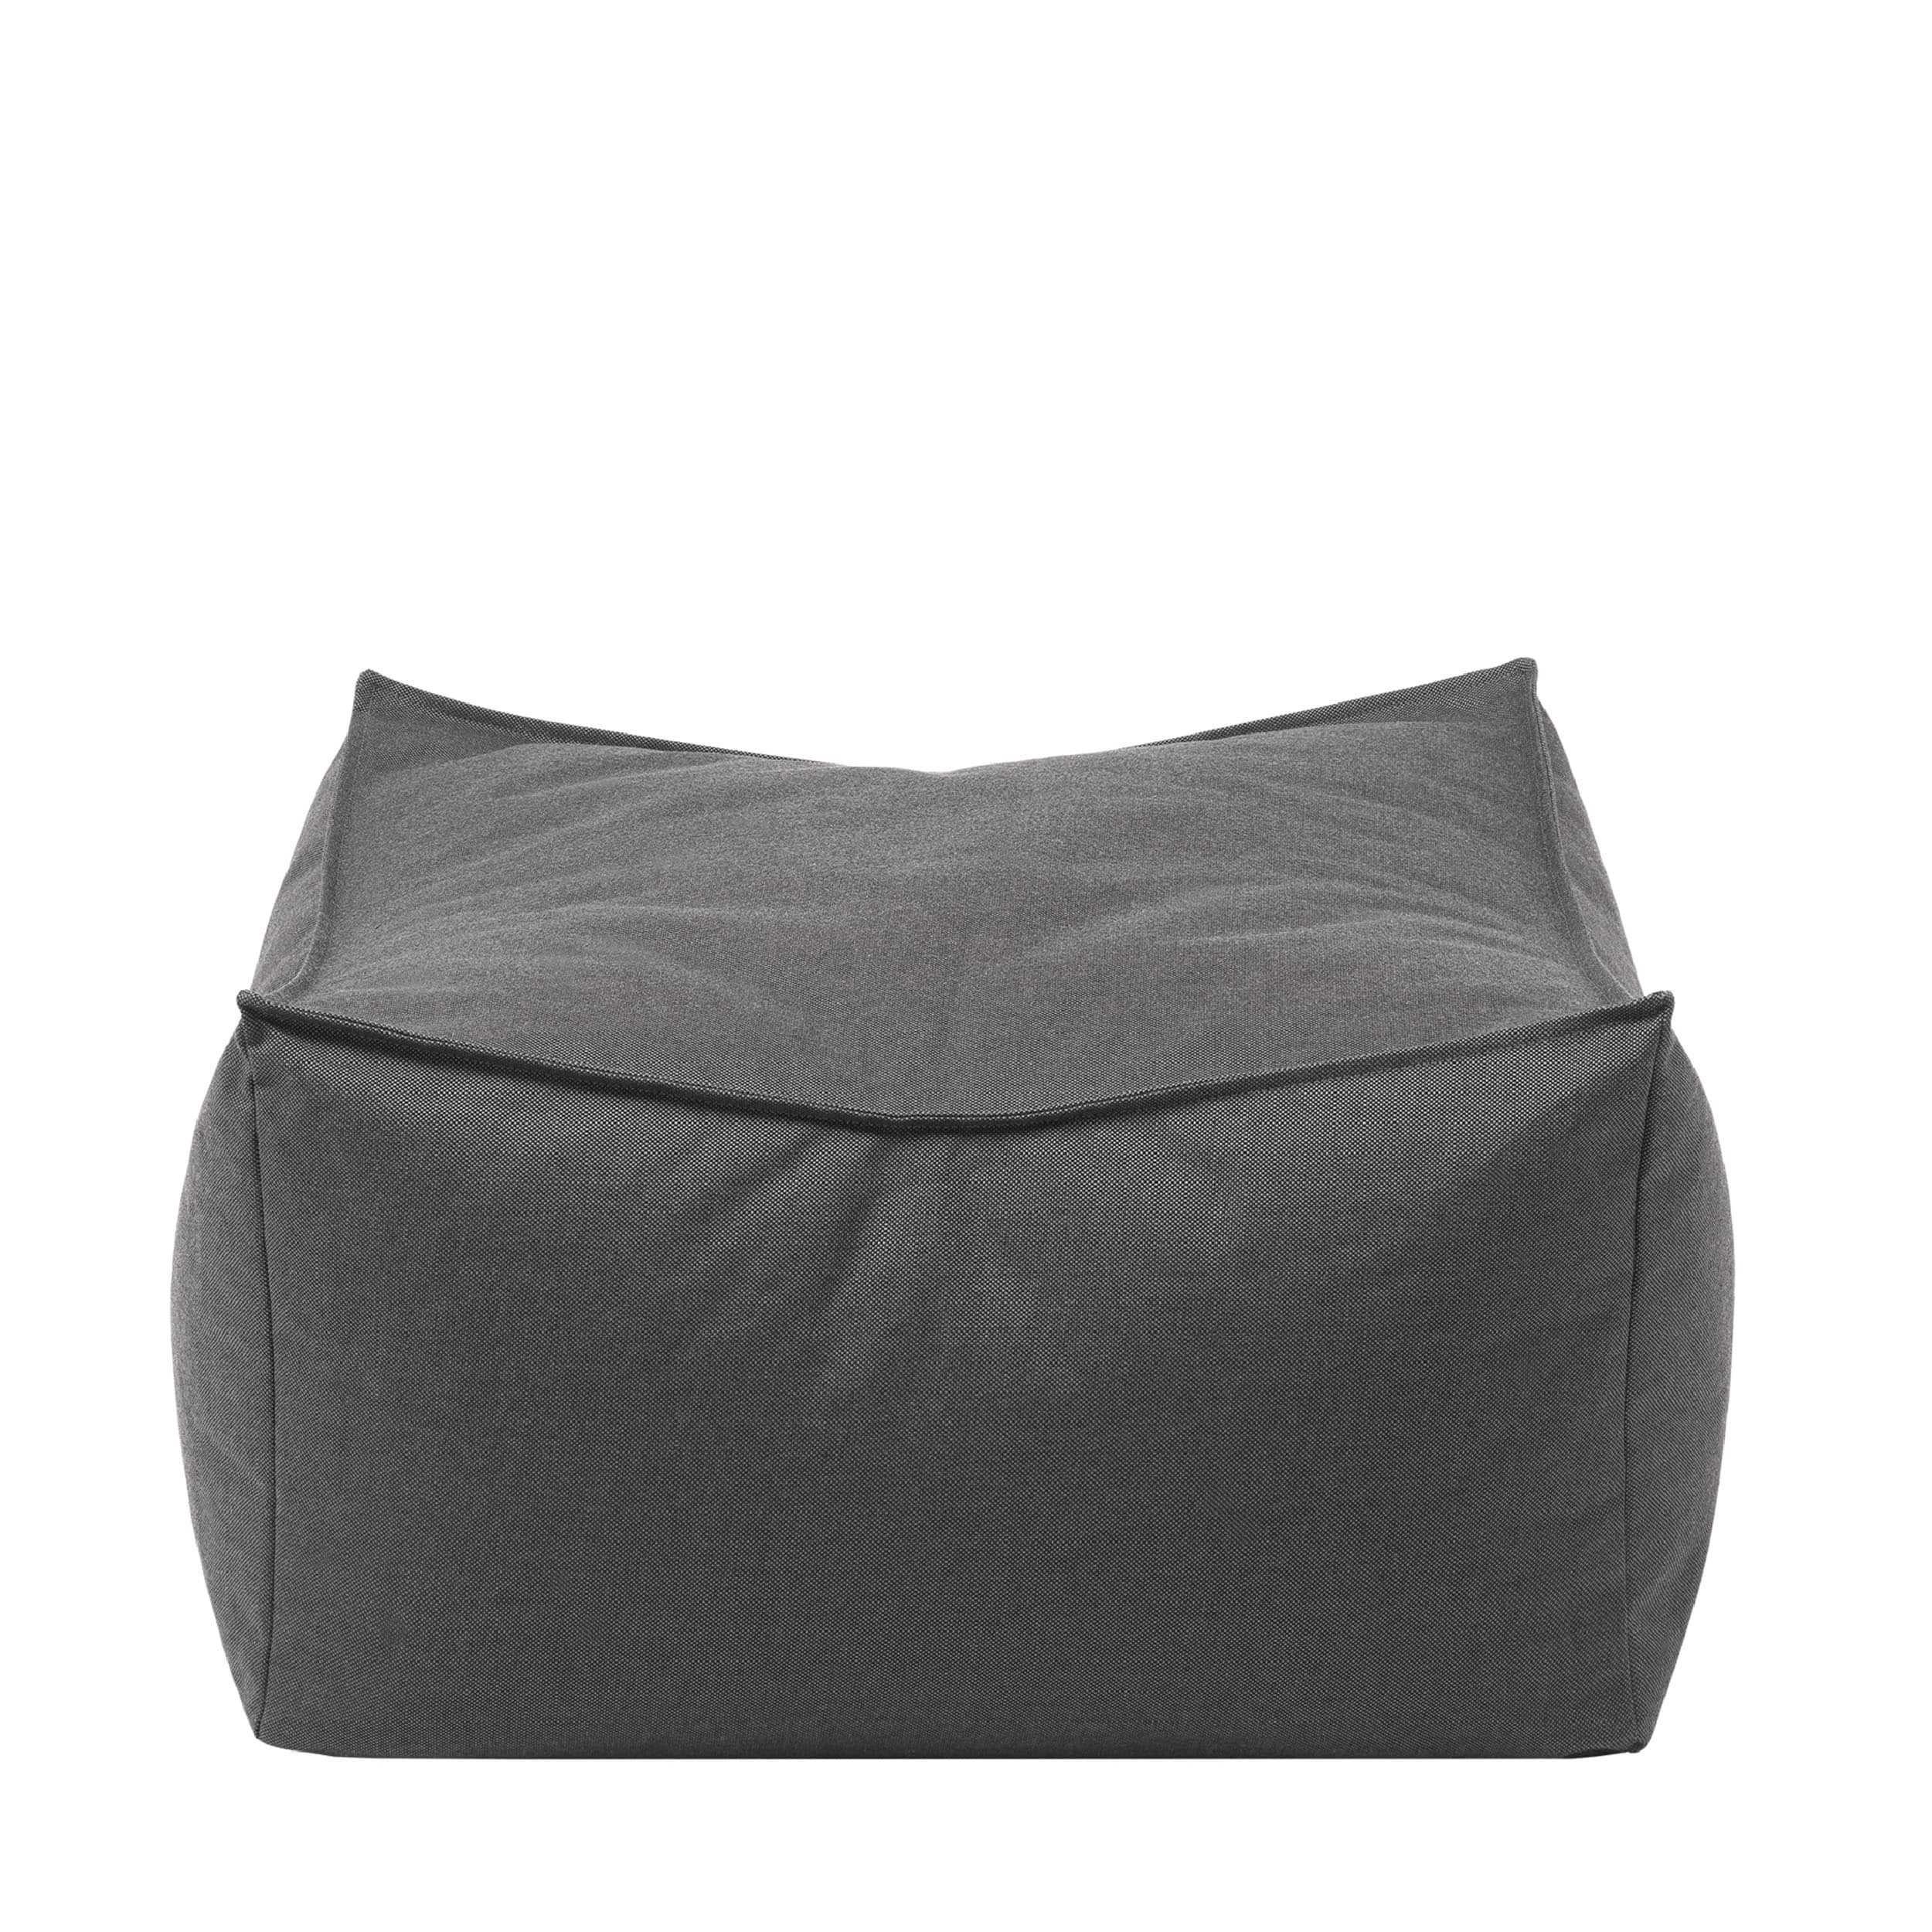 Stay Lounger Pouf Outdoor